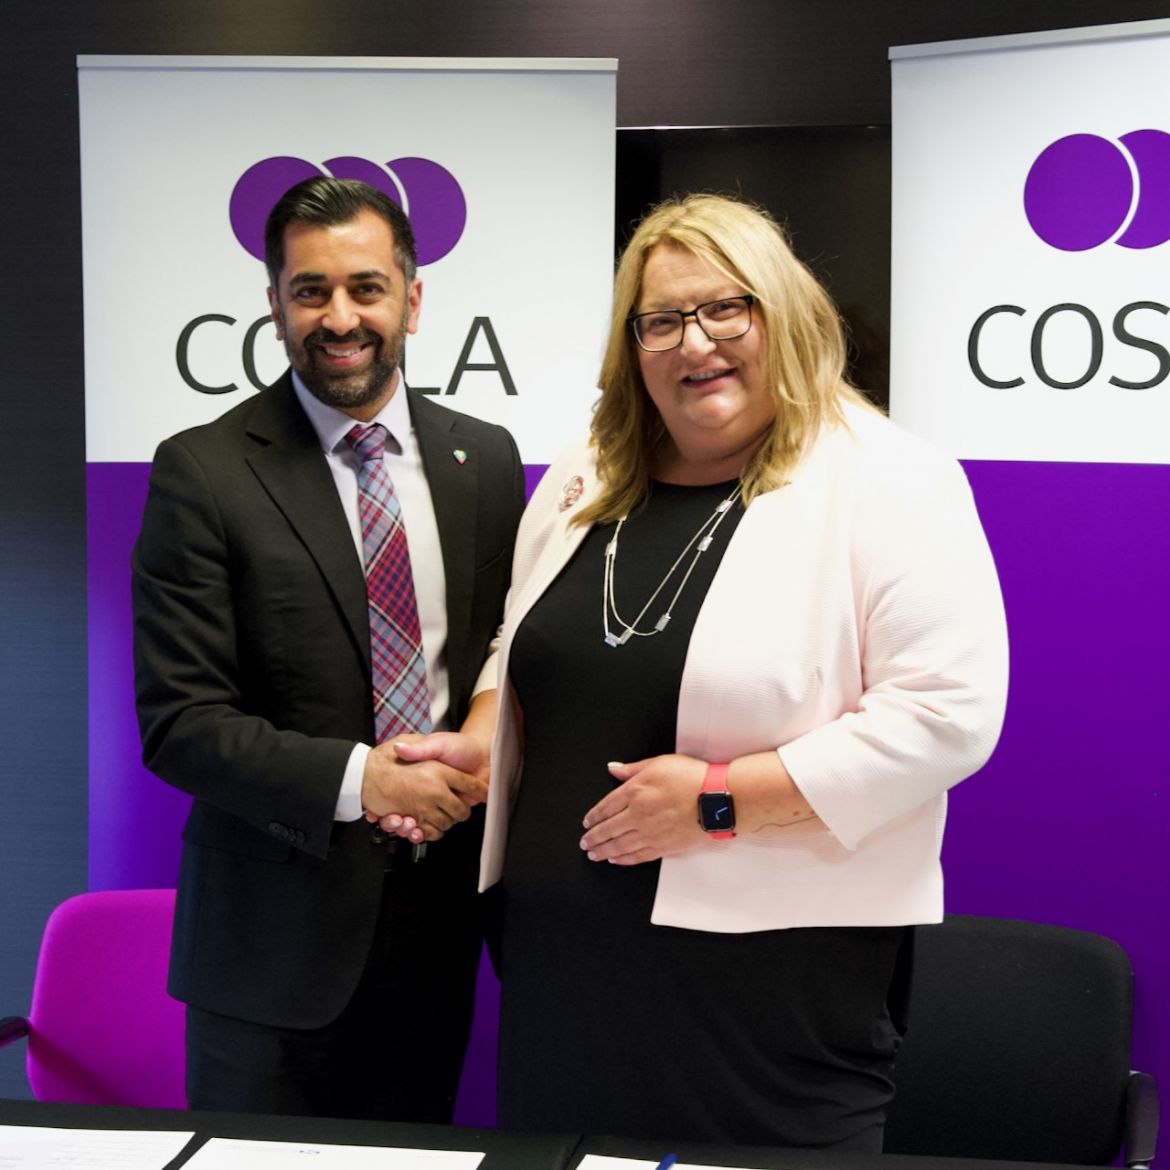 Shona Morrison of COSLA said that Humza Yousaf’s promise to freeze council tax next year was a ‘serious breach’ of the agreement signed between the Scottish Government and councils less than four months ago.